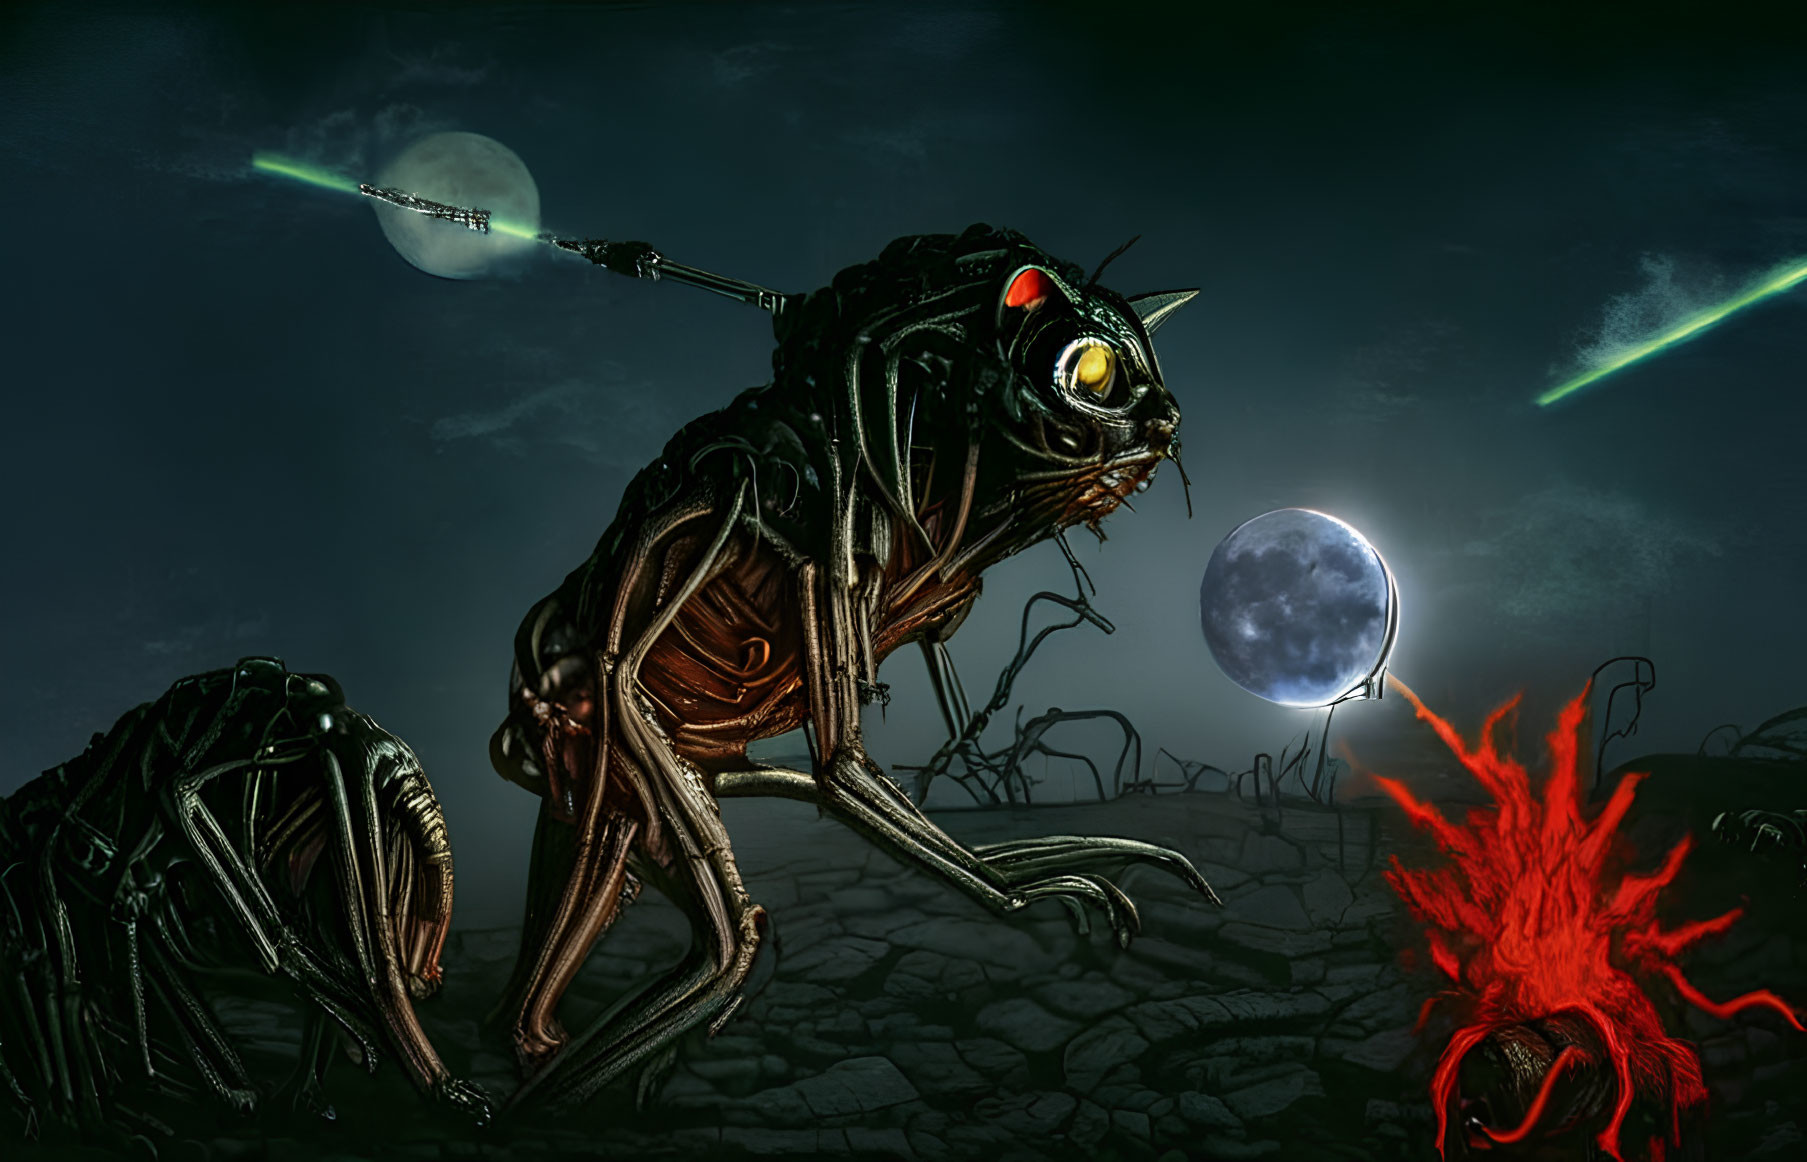 Mechanized insect-like creatures in barren landscape with glowing orb, moon, and shooting stars